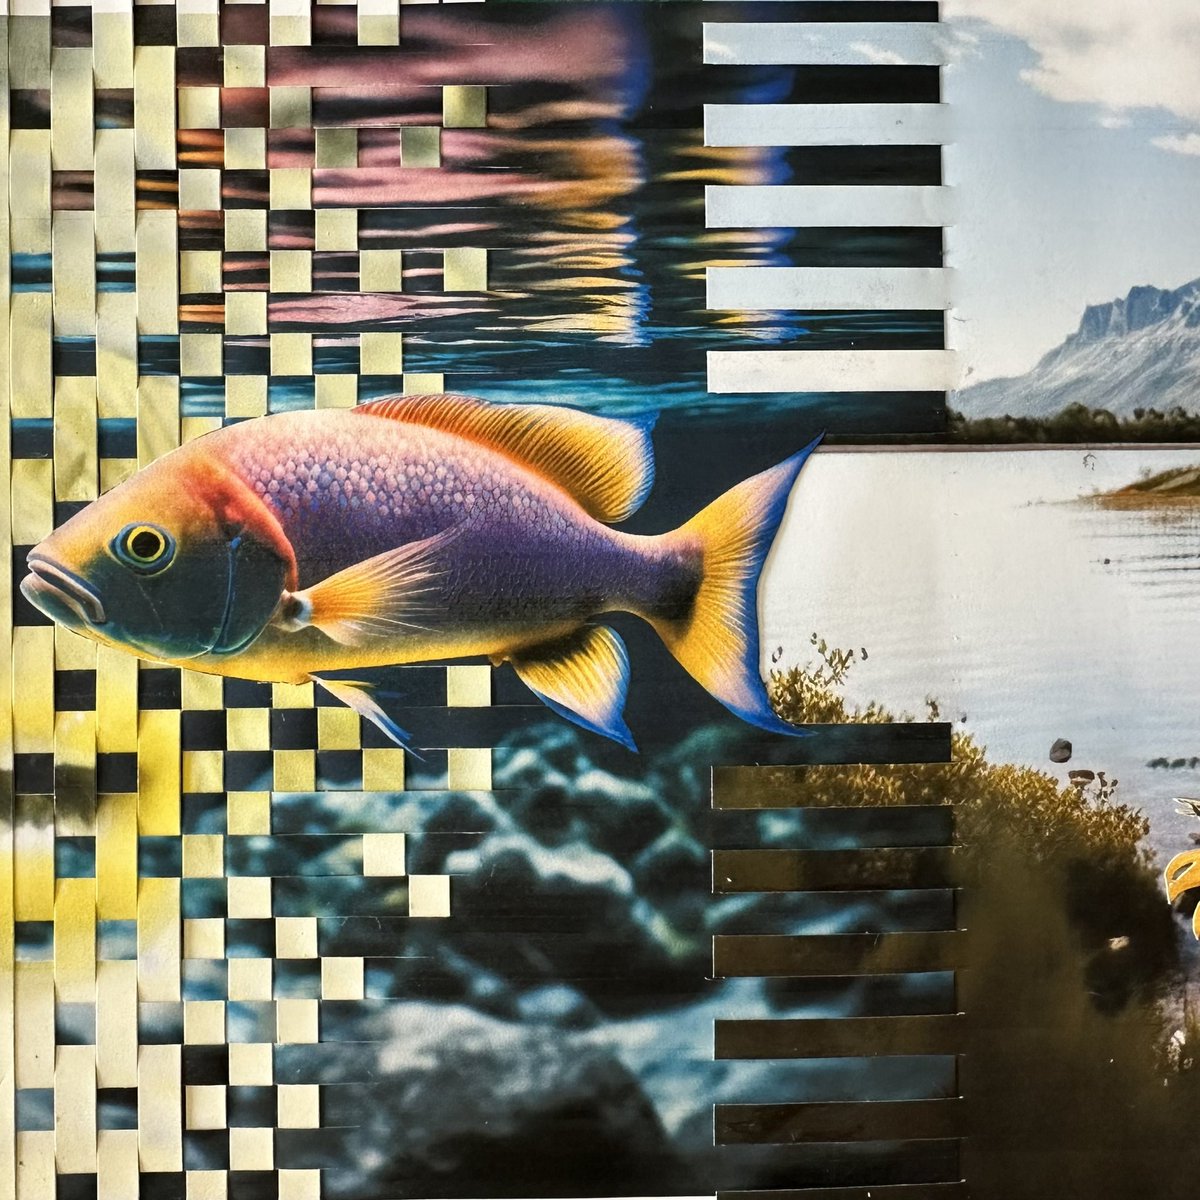 Future Fish

#Februllage #februllage2023 #loop #finished #notfinished #analogcollage #collageart #wovencollage #handmadecollage #papercollage